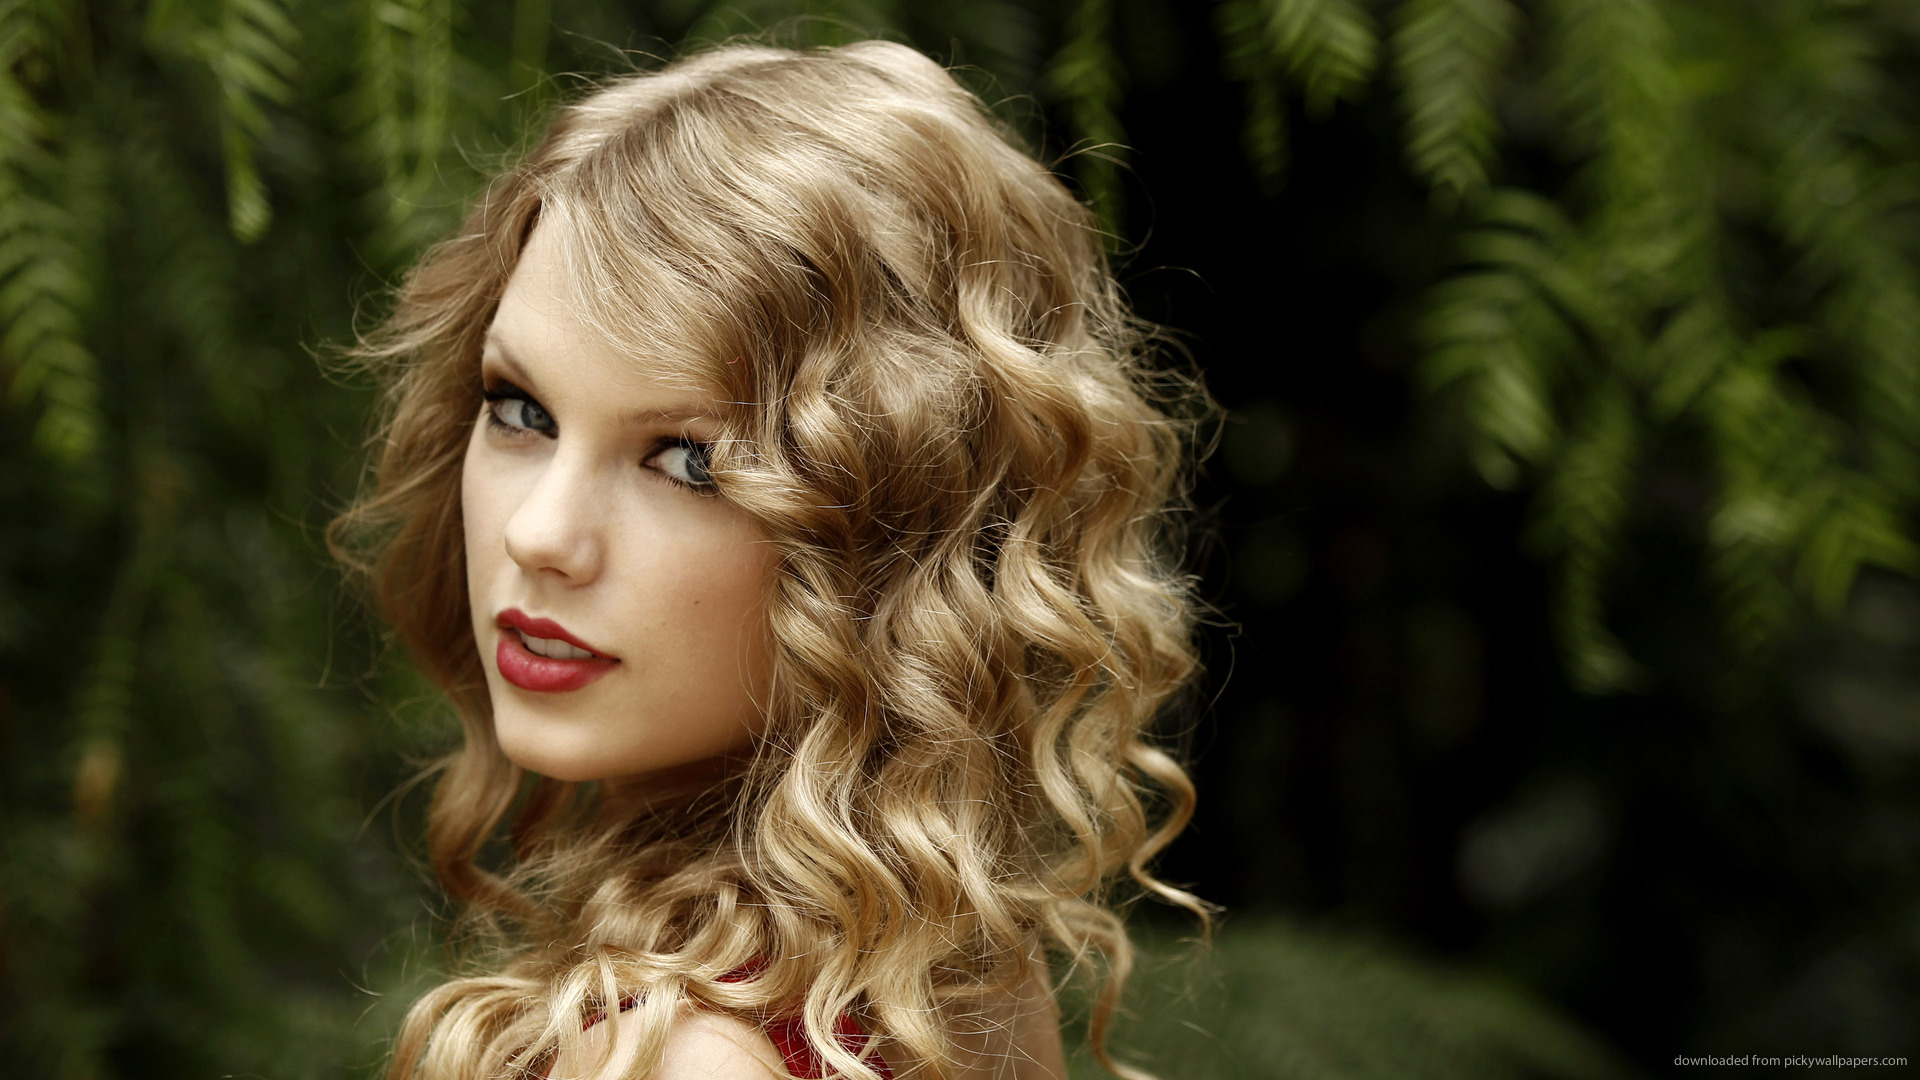 13 Taylor Swift Hair Moments Almost as Iconic as Her Discography